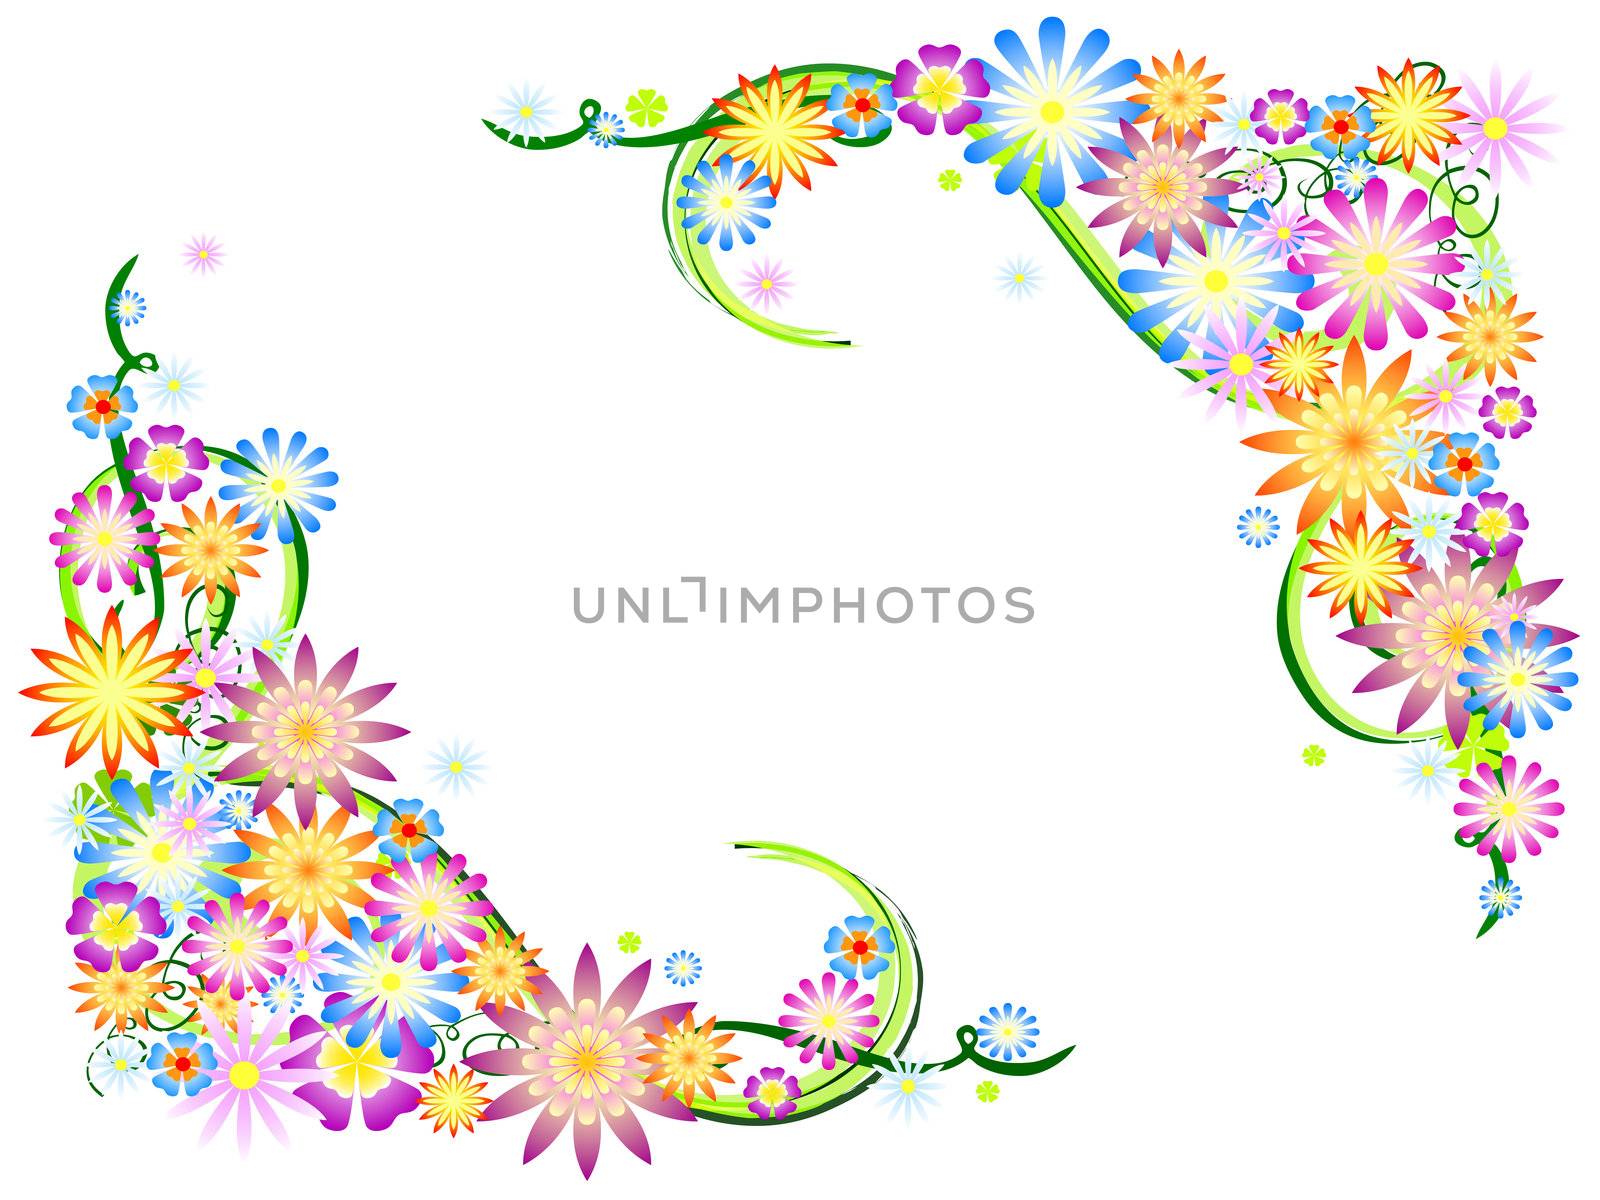 colours flowers with floral ornaments, spring motif